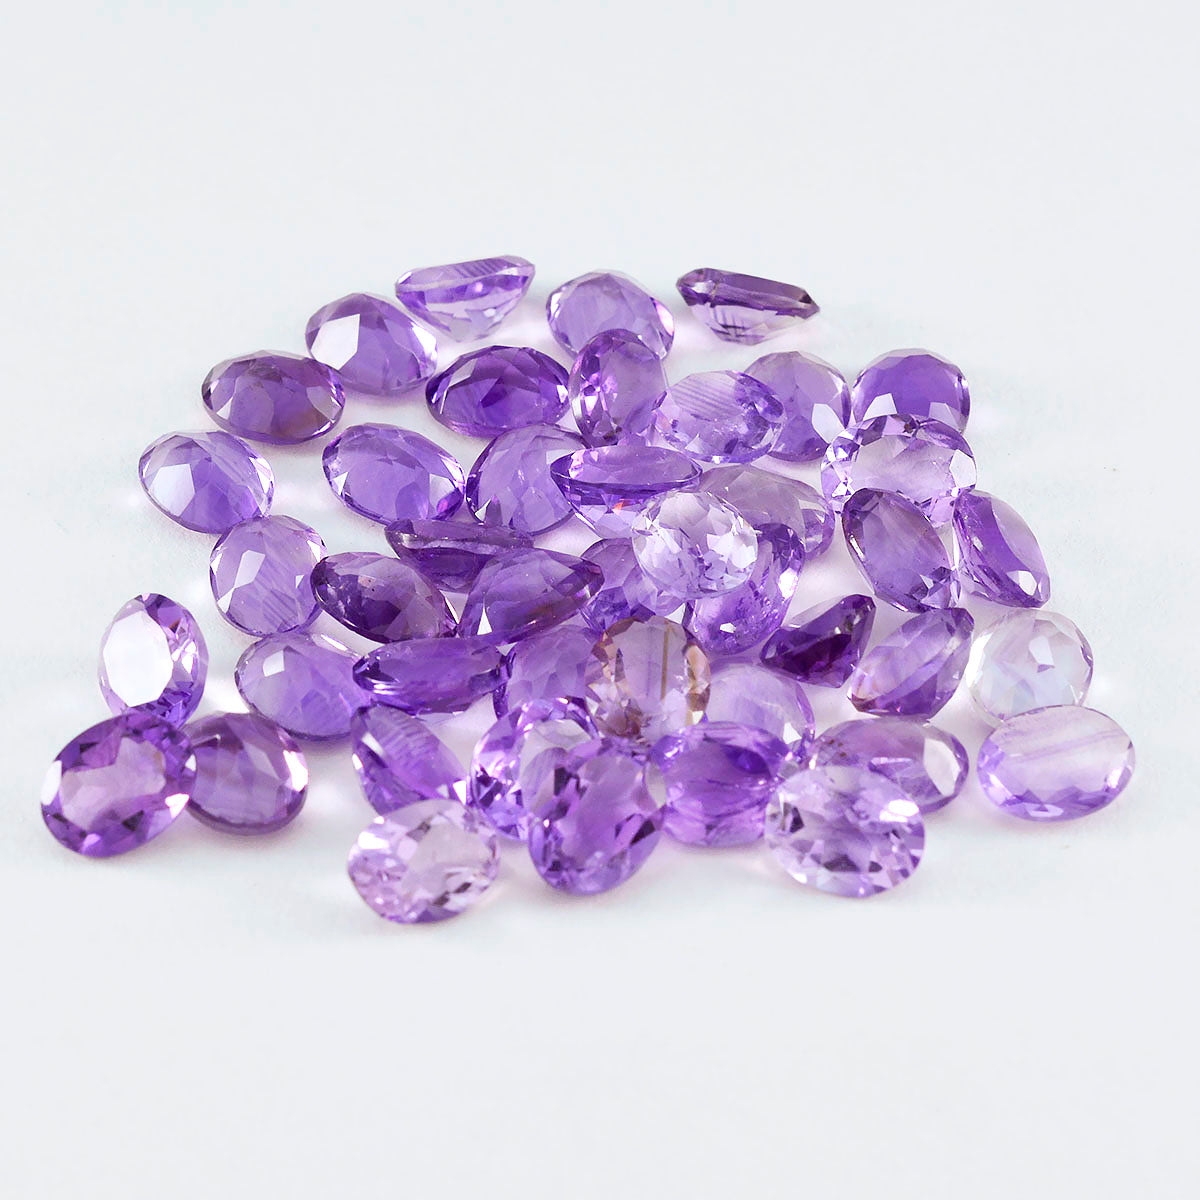 Riyogems 1PC Natural Purple Amethyst Faceted 3x5 mm Oval Shape AA Quality Loose Gems